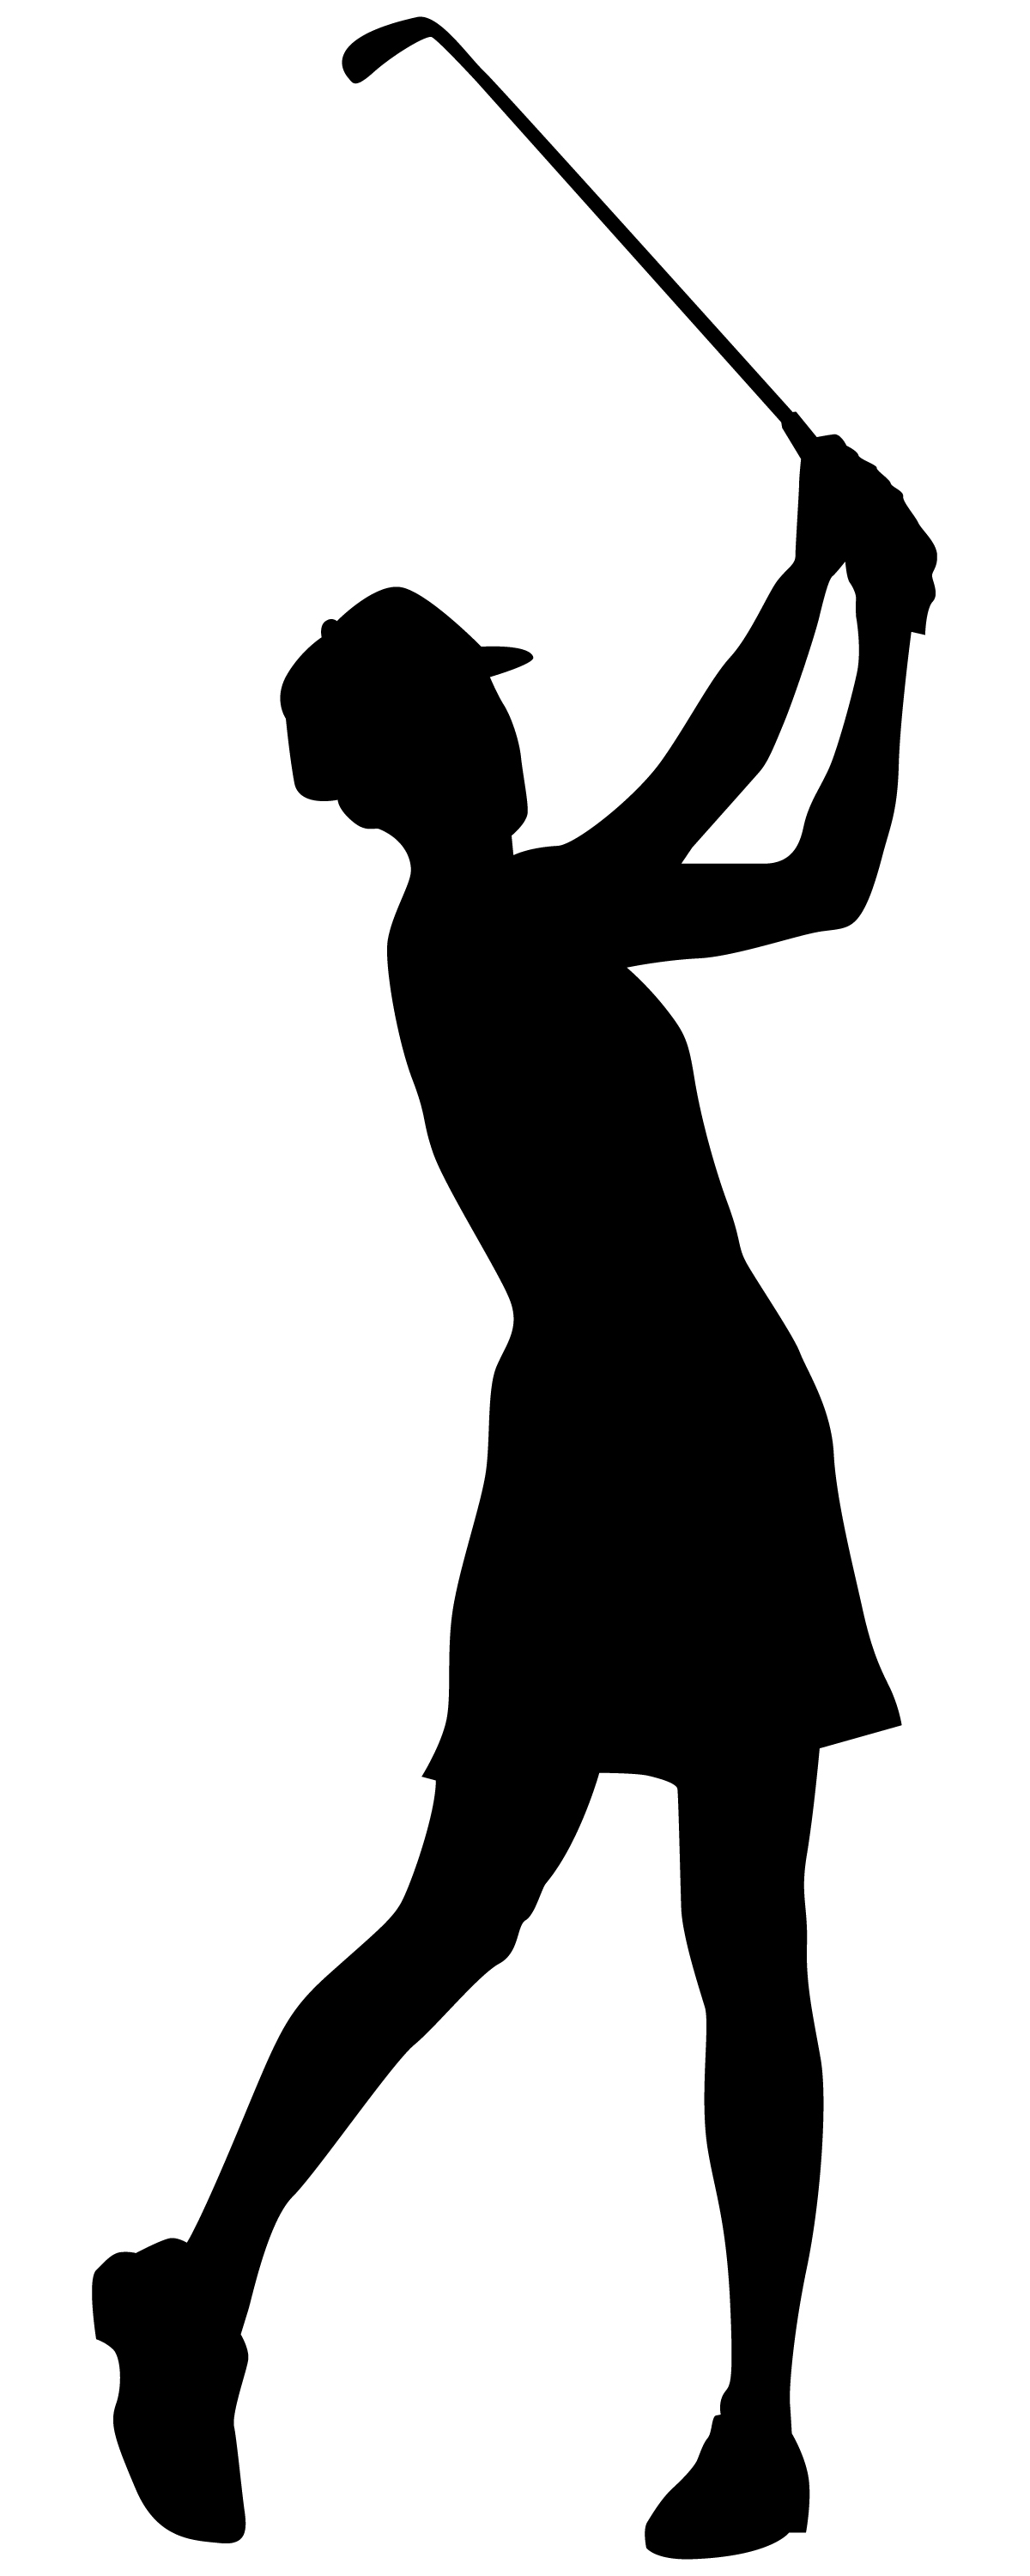 Lady Golfer Silhouette Clipart 